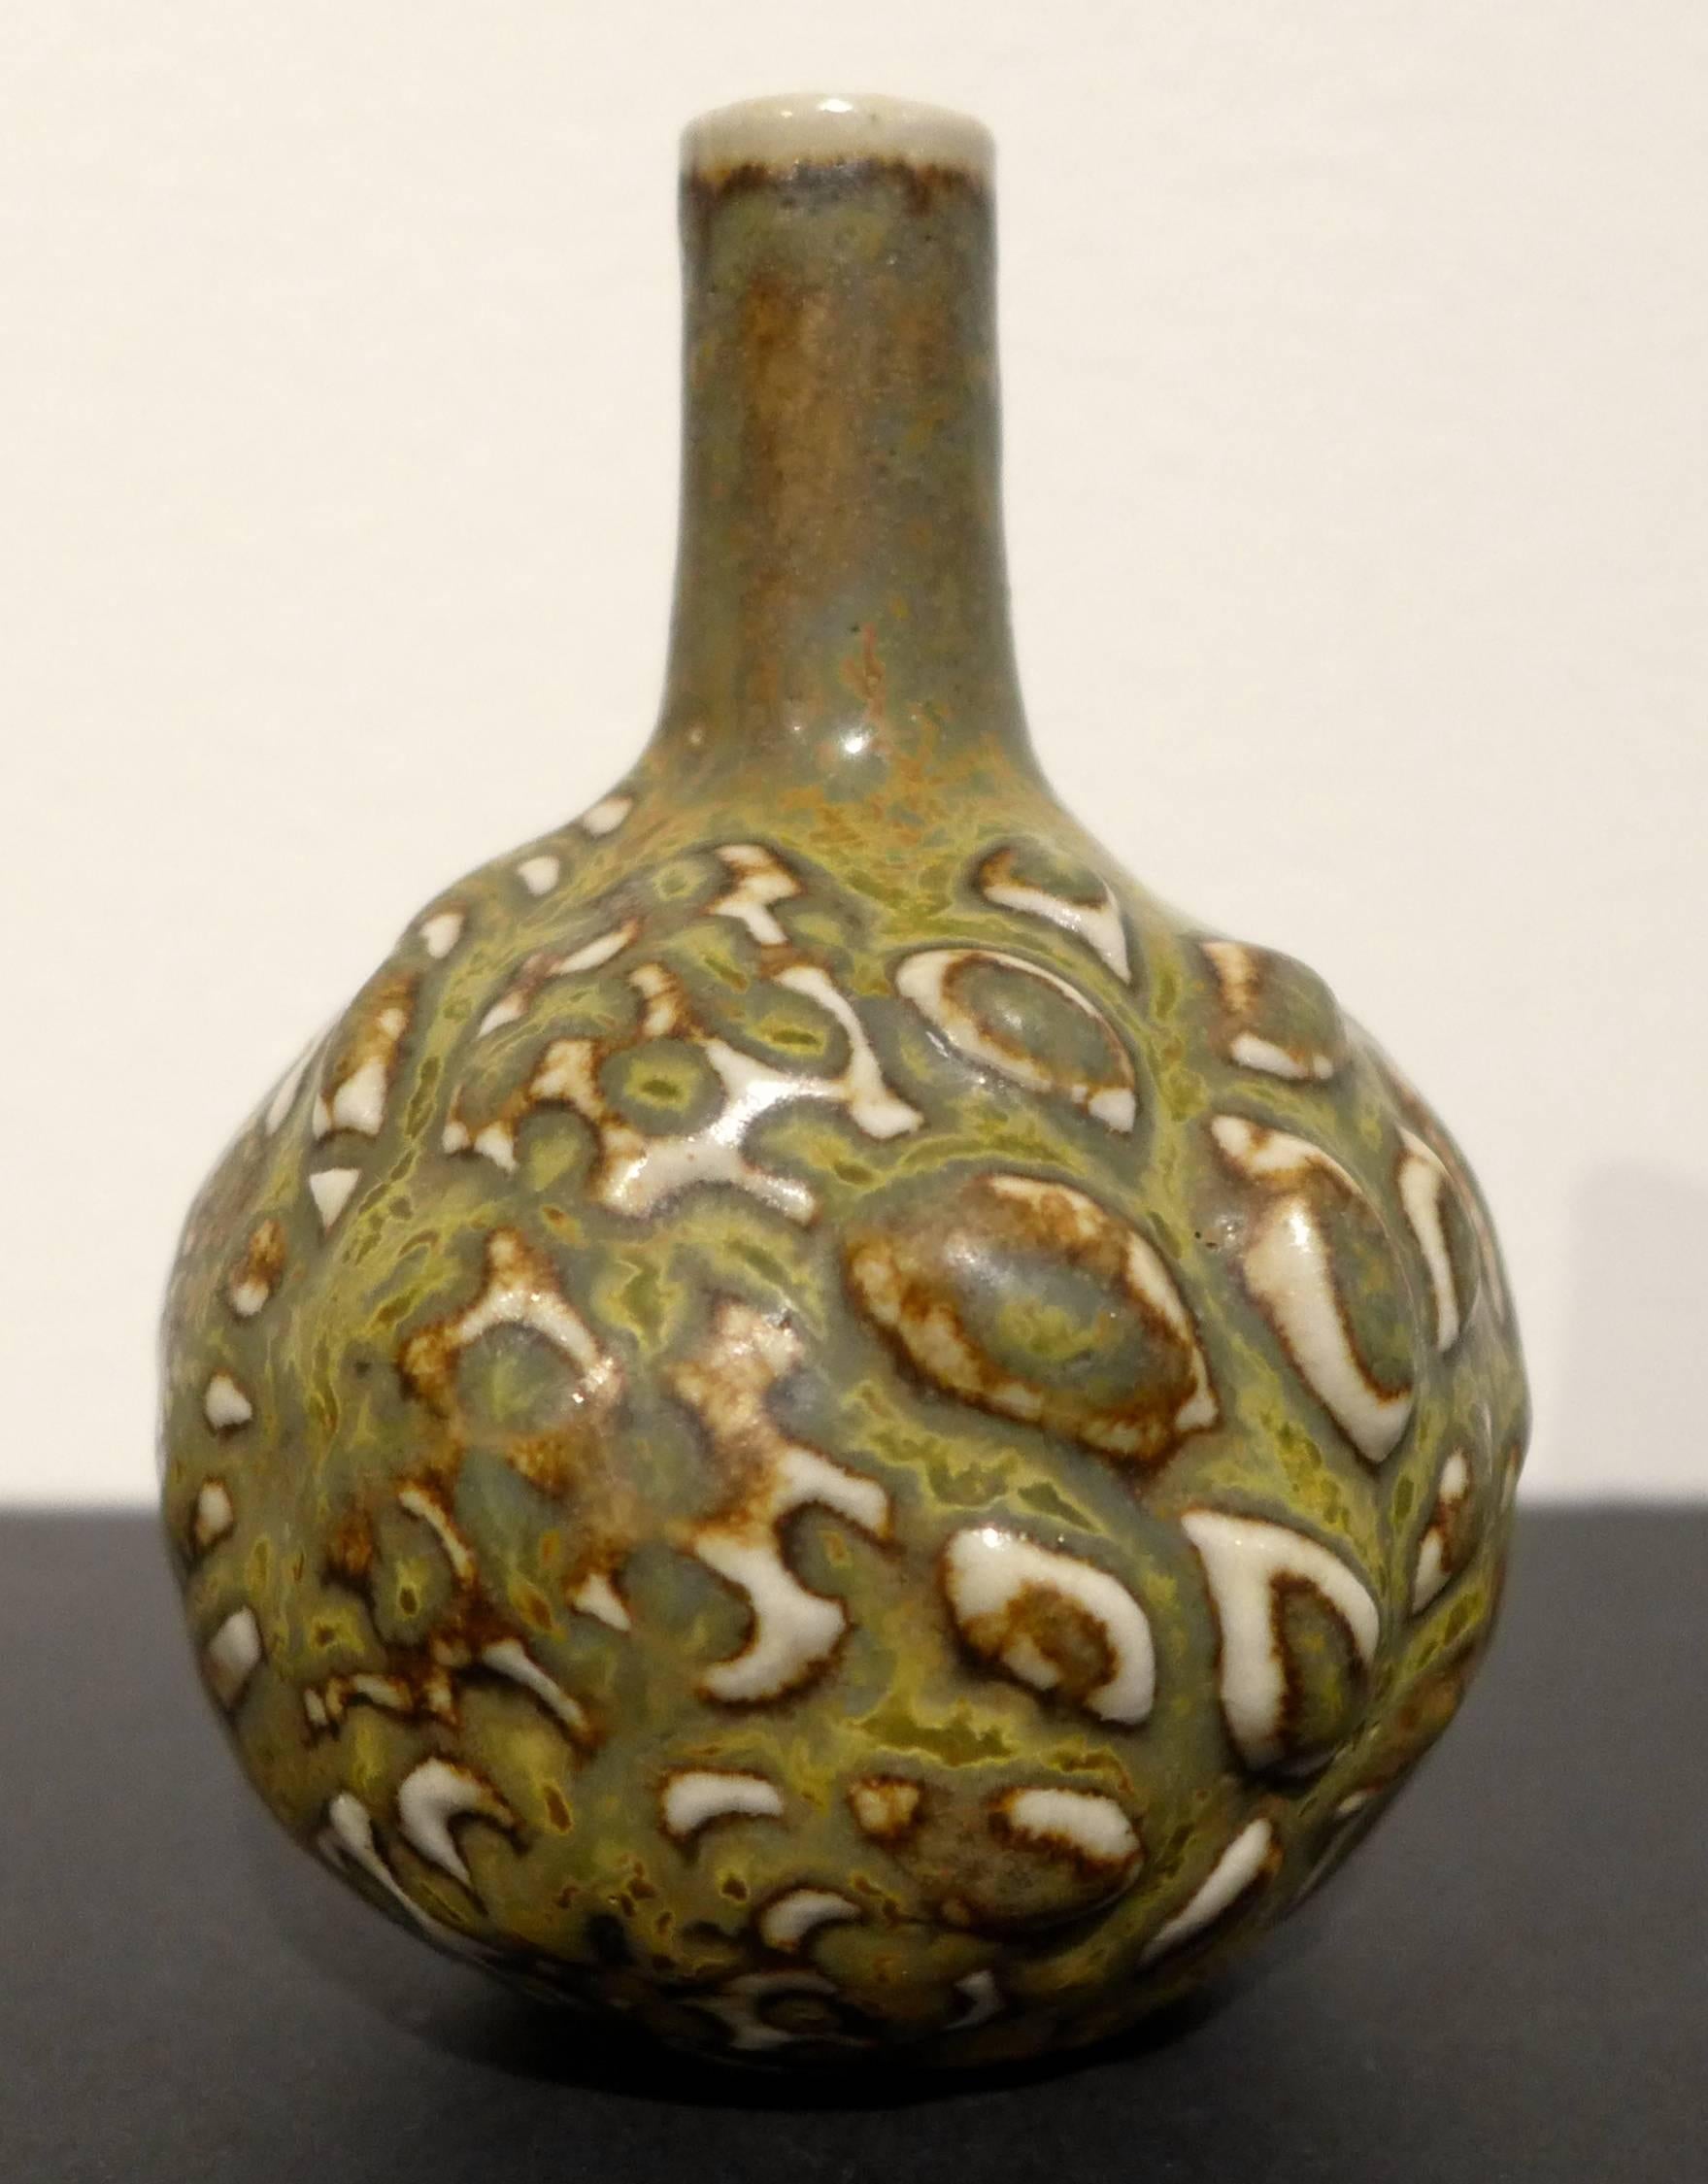 Small budding vase with greenish/yellow to brown solfatara glaze, by Danish master ceramist Axel Salto. Produced at Royal Copenhagen, circa 1950s. Etched Salto signature, along with painted waves and the number 21423.